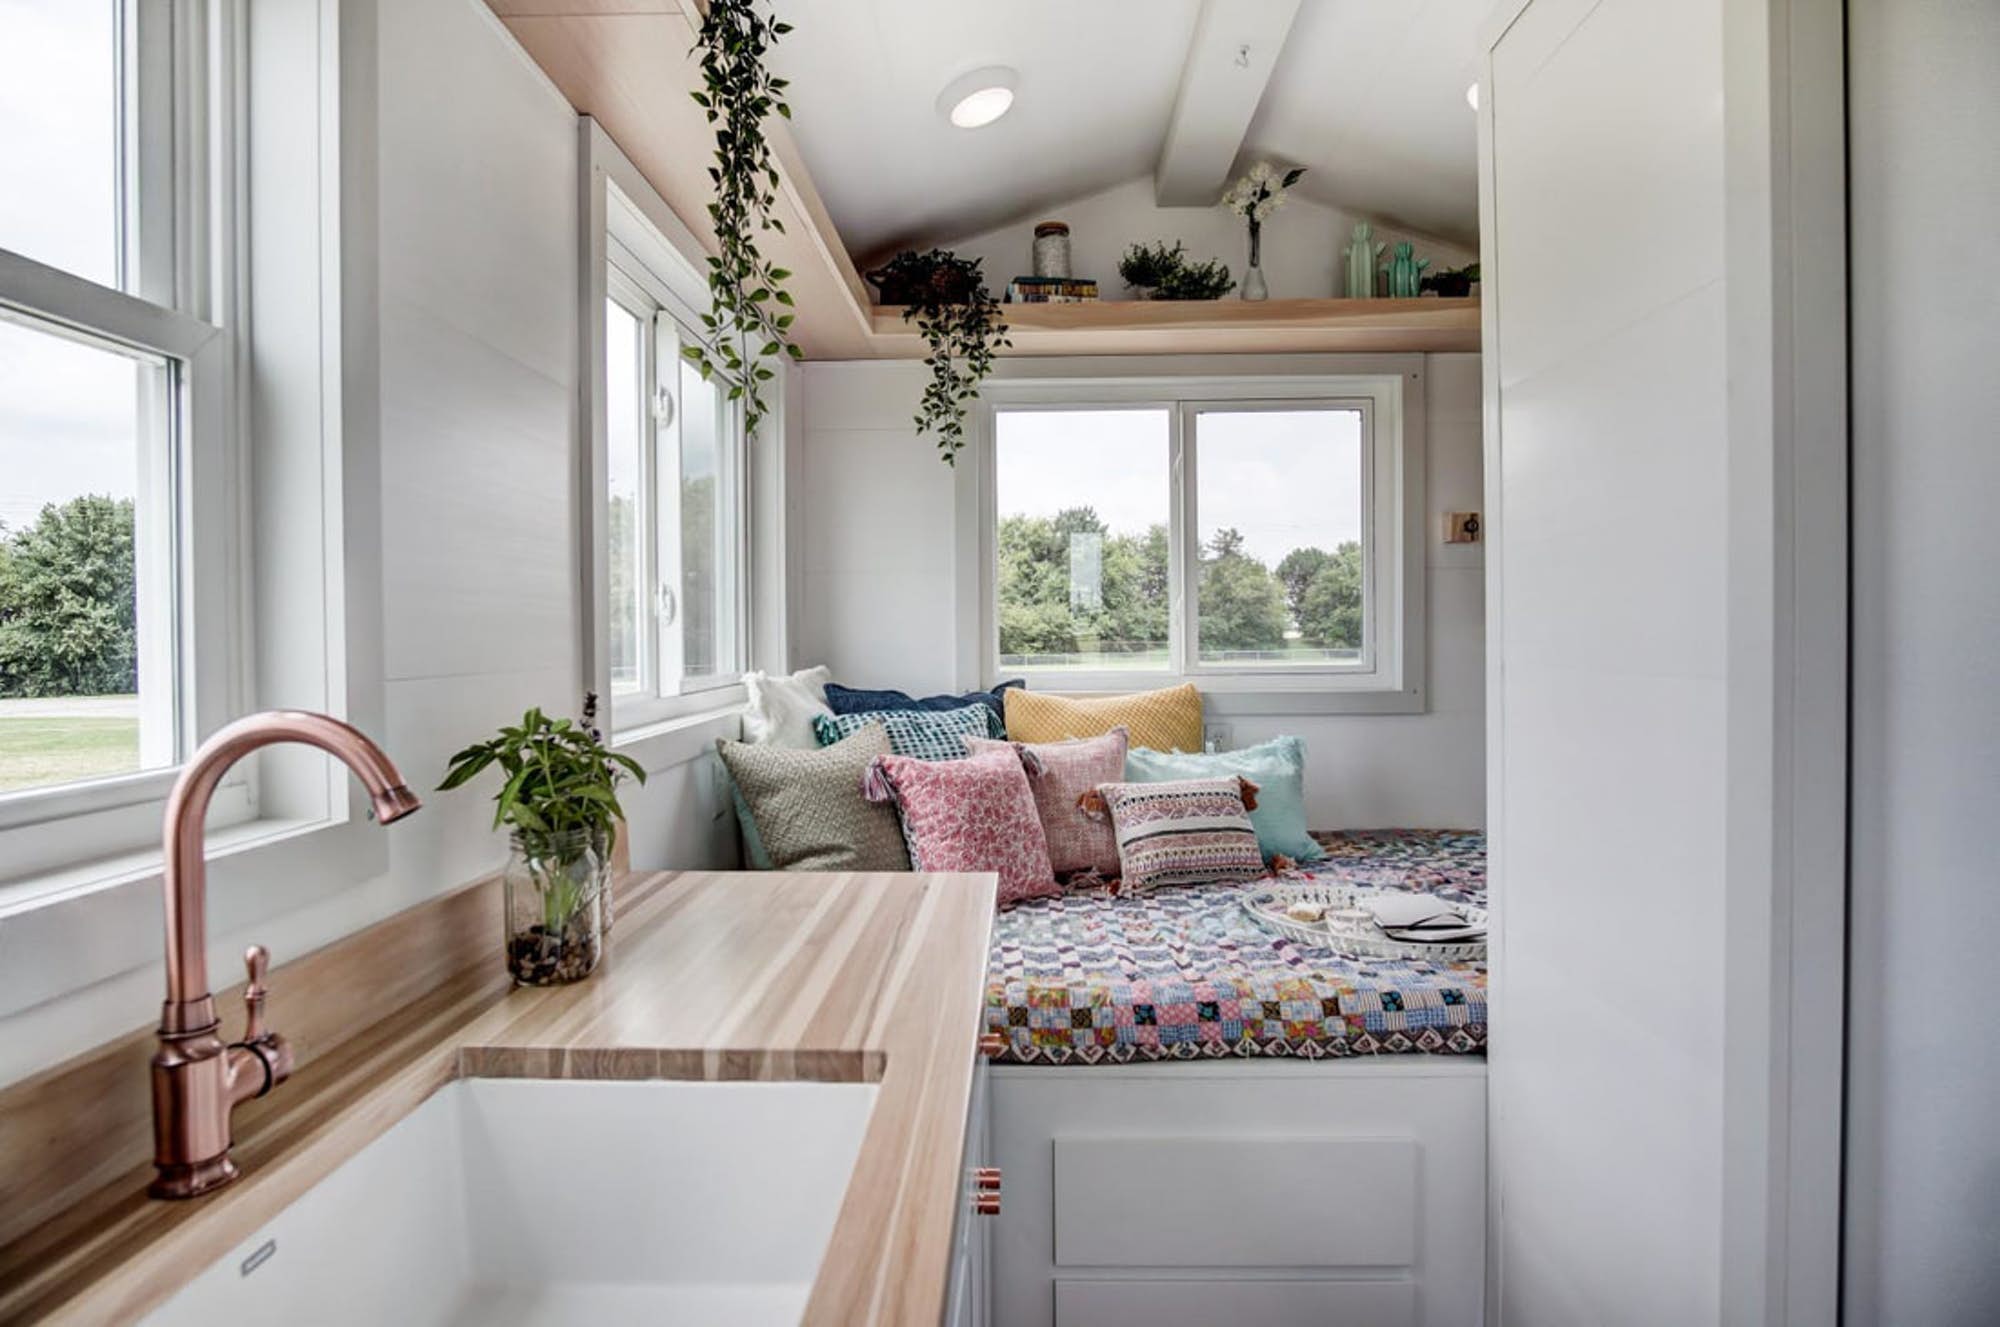 Top Tiny Homes - Inside The Nugget